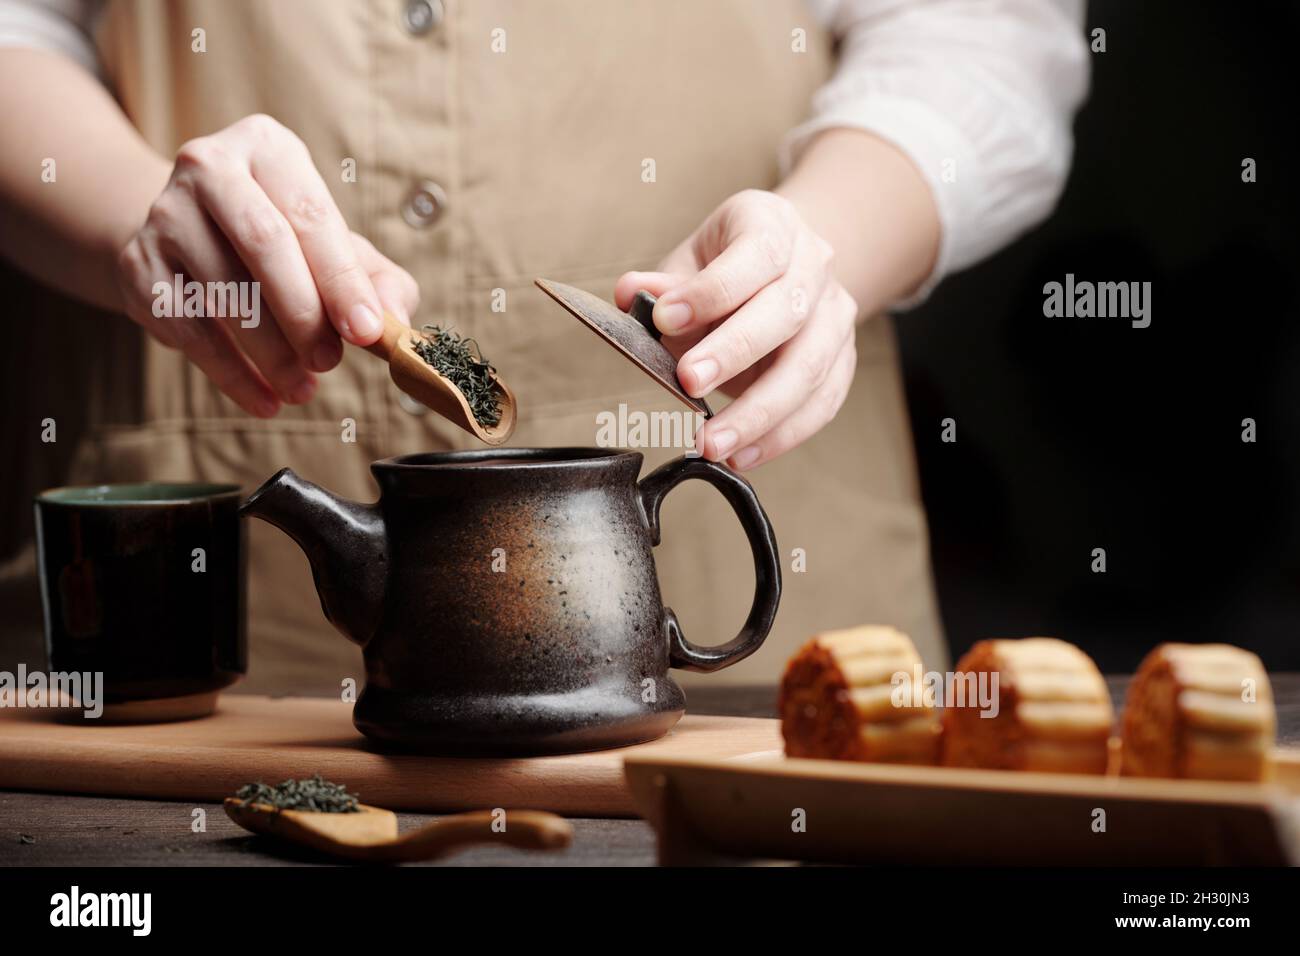 Close-up image of man putting spoon of dried tea leaves in ceramic pot Stock Photo